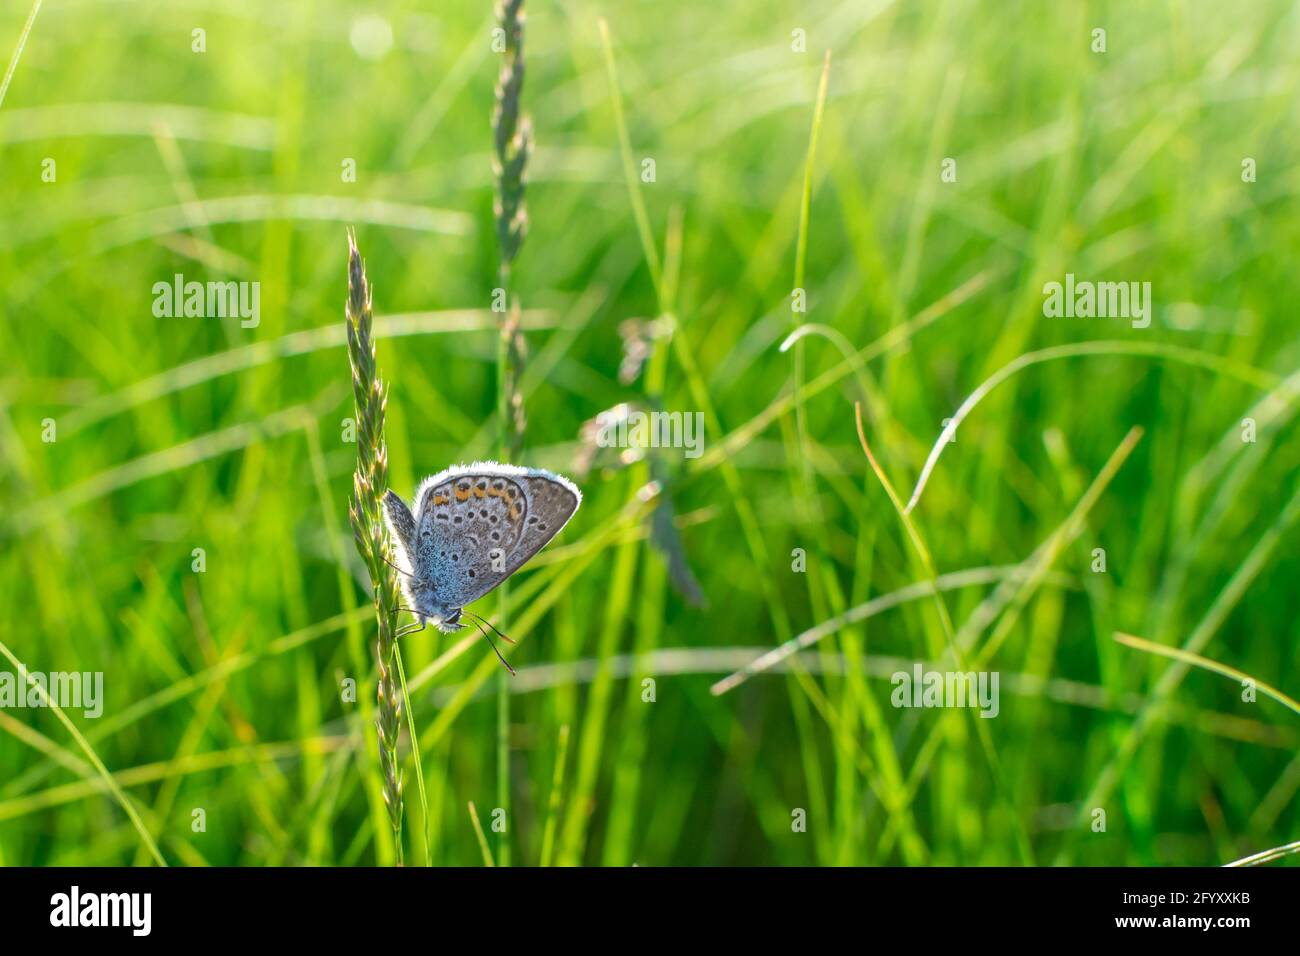 A silver strewn blue butterfly Plebejus argus is resting and sitting on the grass against a blurred green background. Common small blue butterfly in Stock Photo